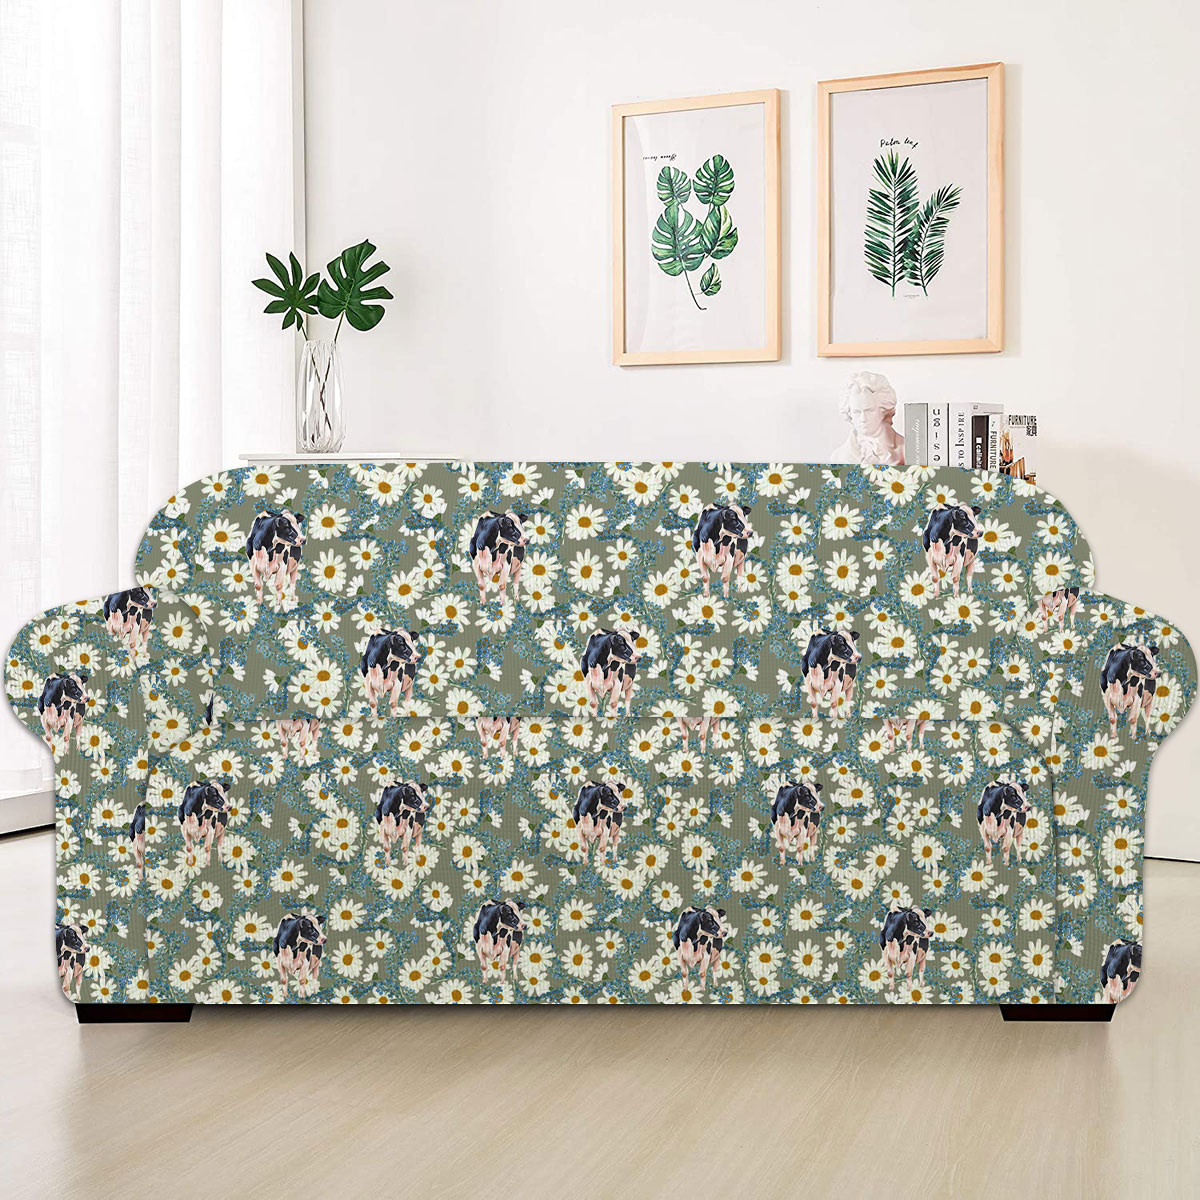 Holstein Camomilles Flower Grey Pattern Sofa Cover